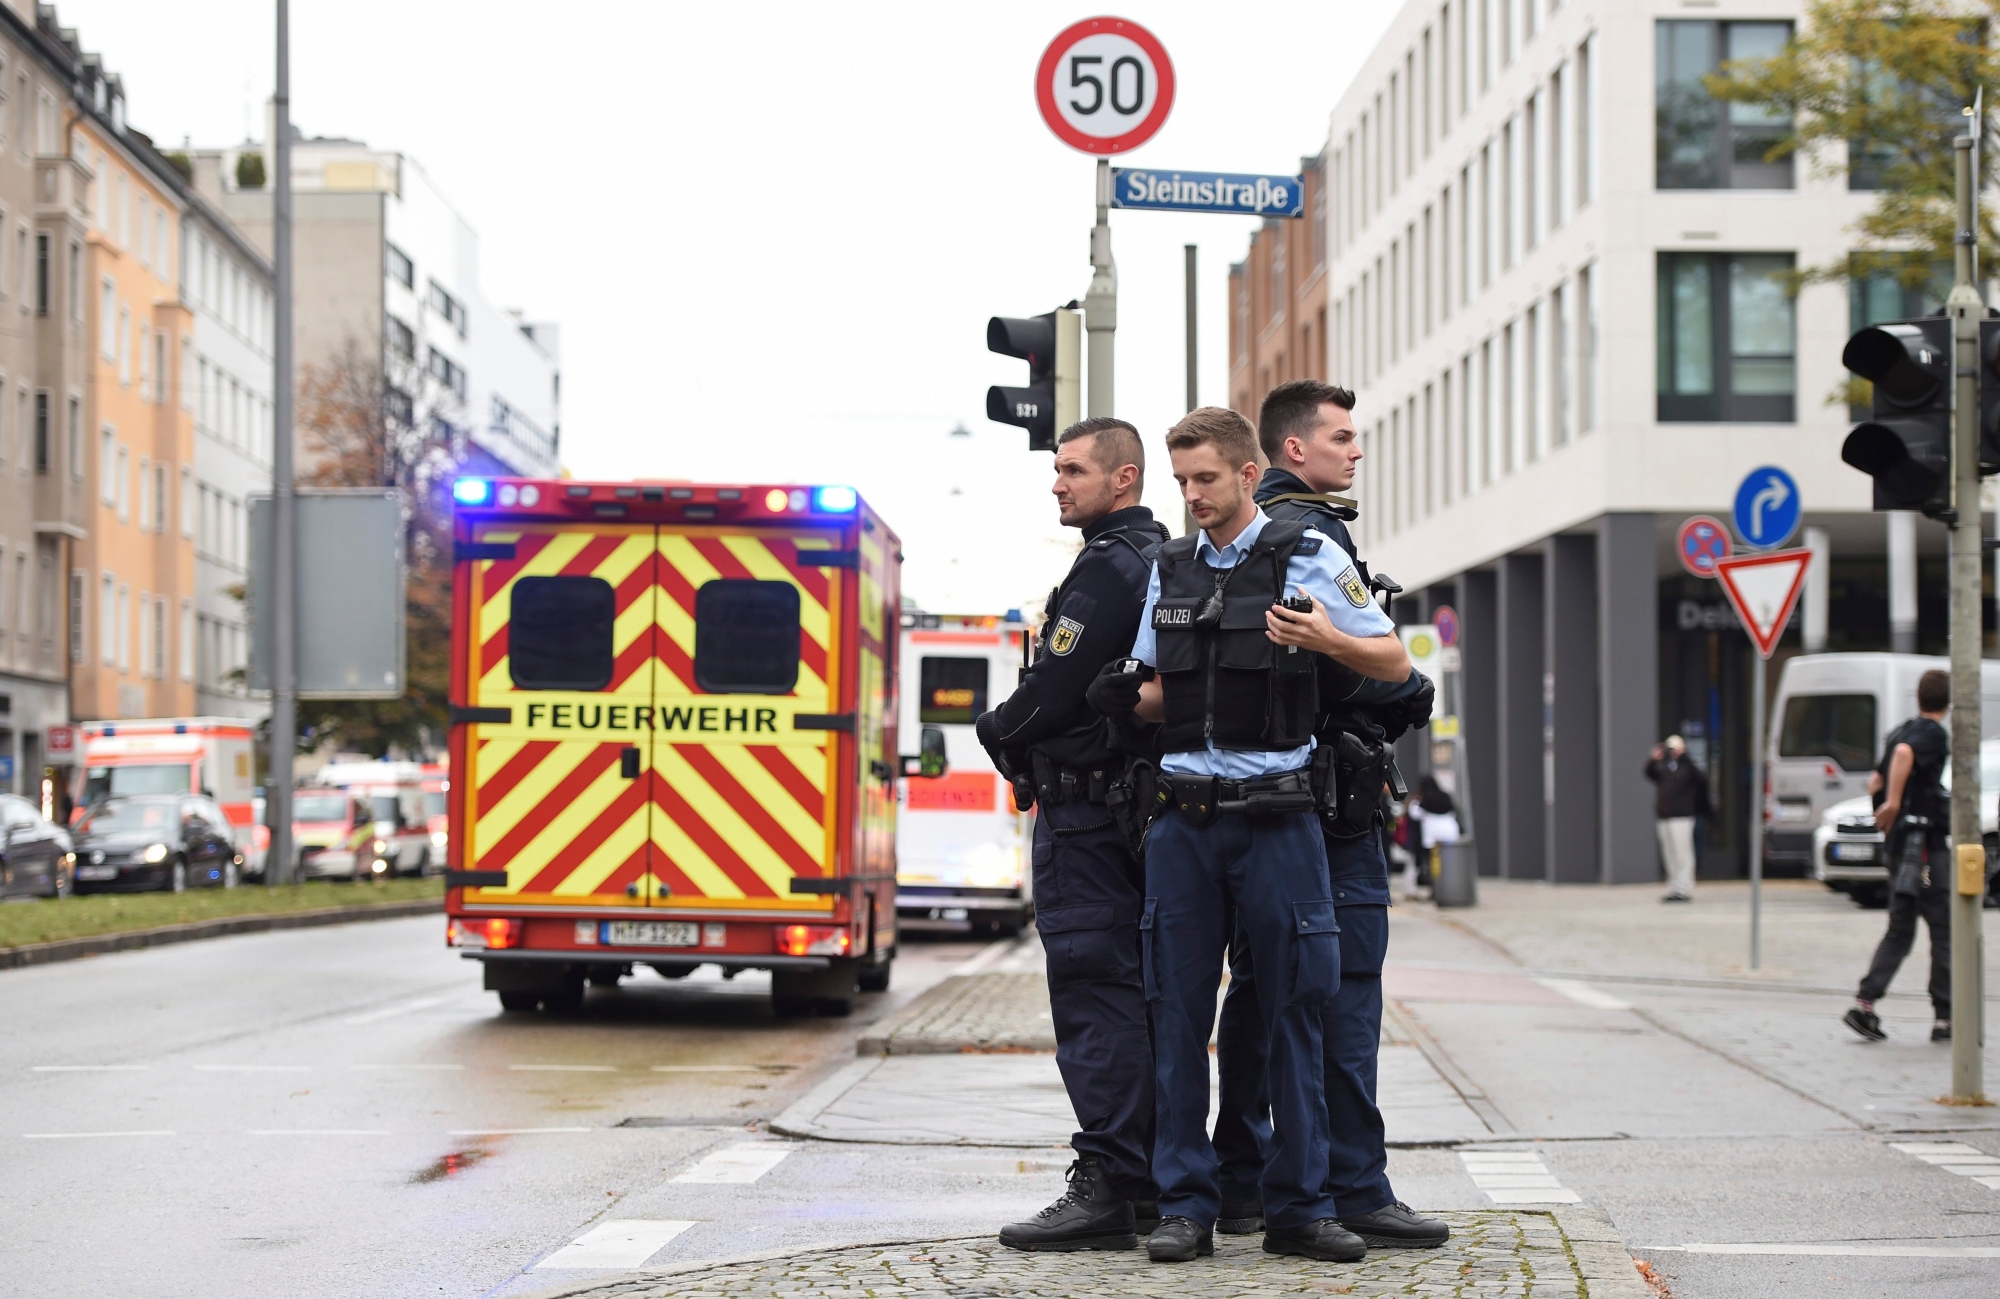 Police guard the area at Rosenheimer Platz square in Munich, Germany, Saturday, Oct. 21, 2017. Police say a man with a knife has lightly wounded several  people in Munich. Officers are looking for the assailant. Munich police called on people in the Rosenheimer Platz  square area, located close to the German city's downtown, to stay inside after the incident on Saturday morning. (Andreas Gebert/dpa via AP) Germany Stabbing